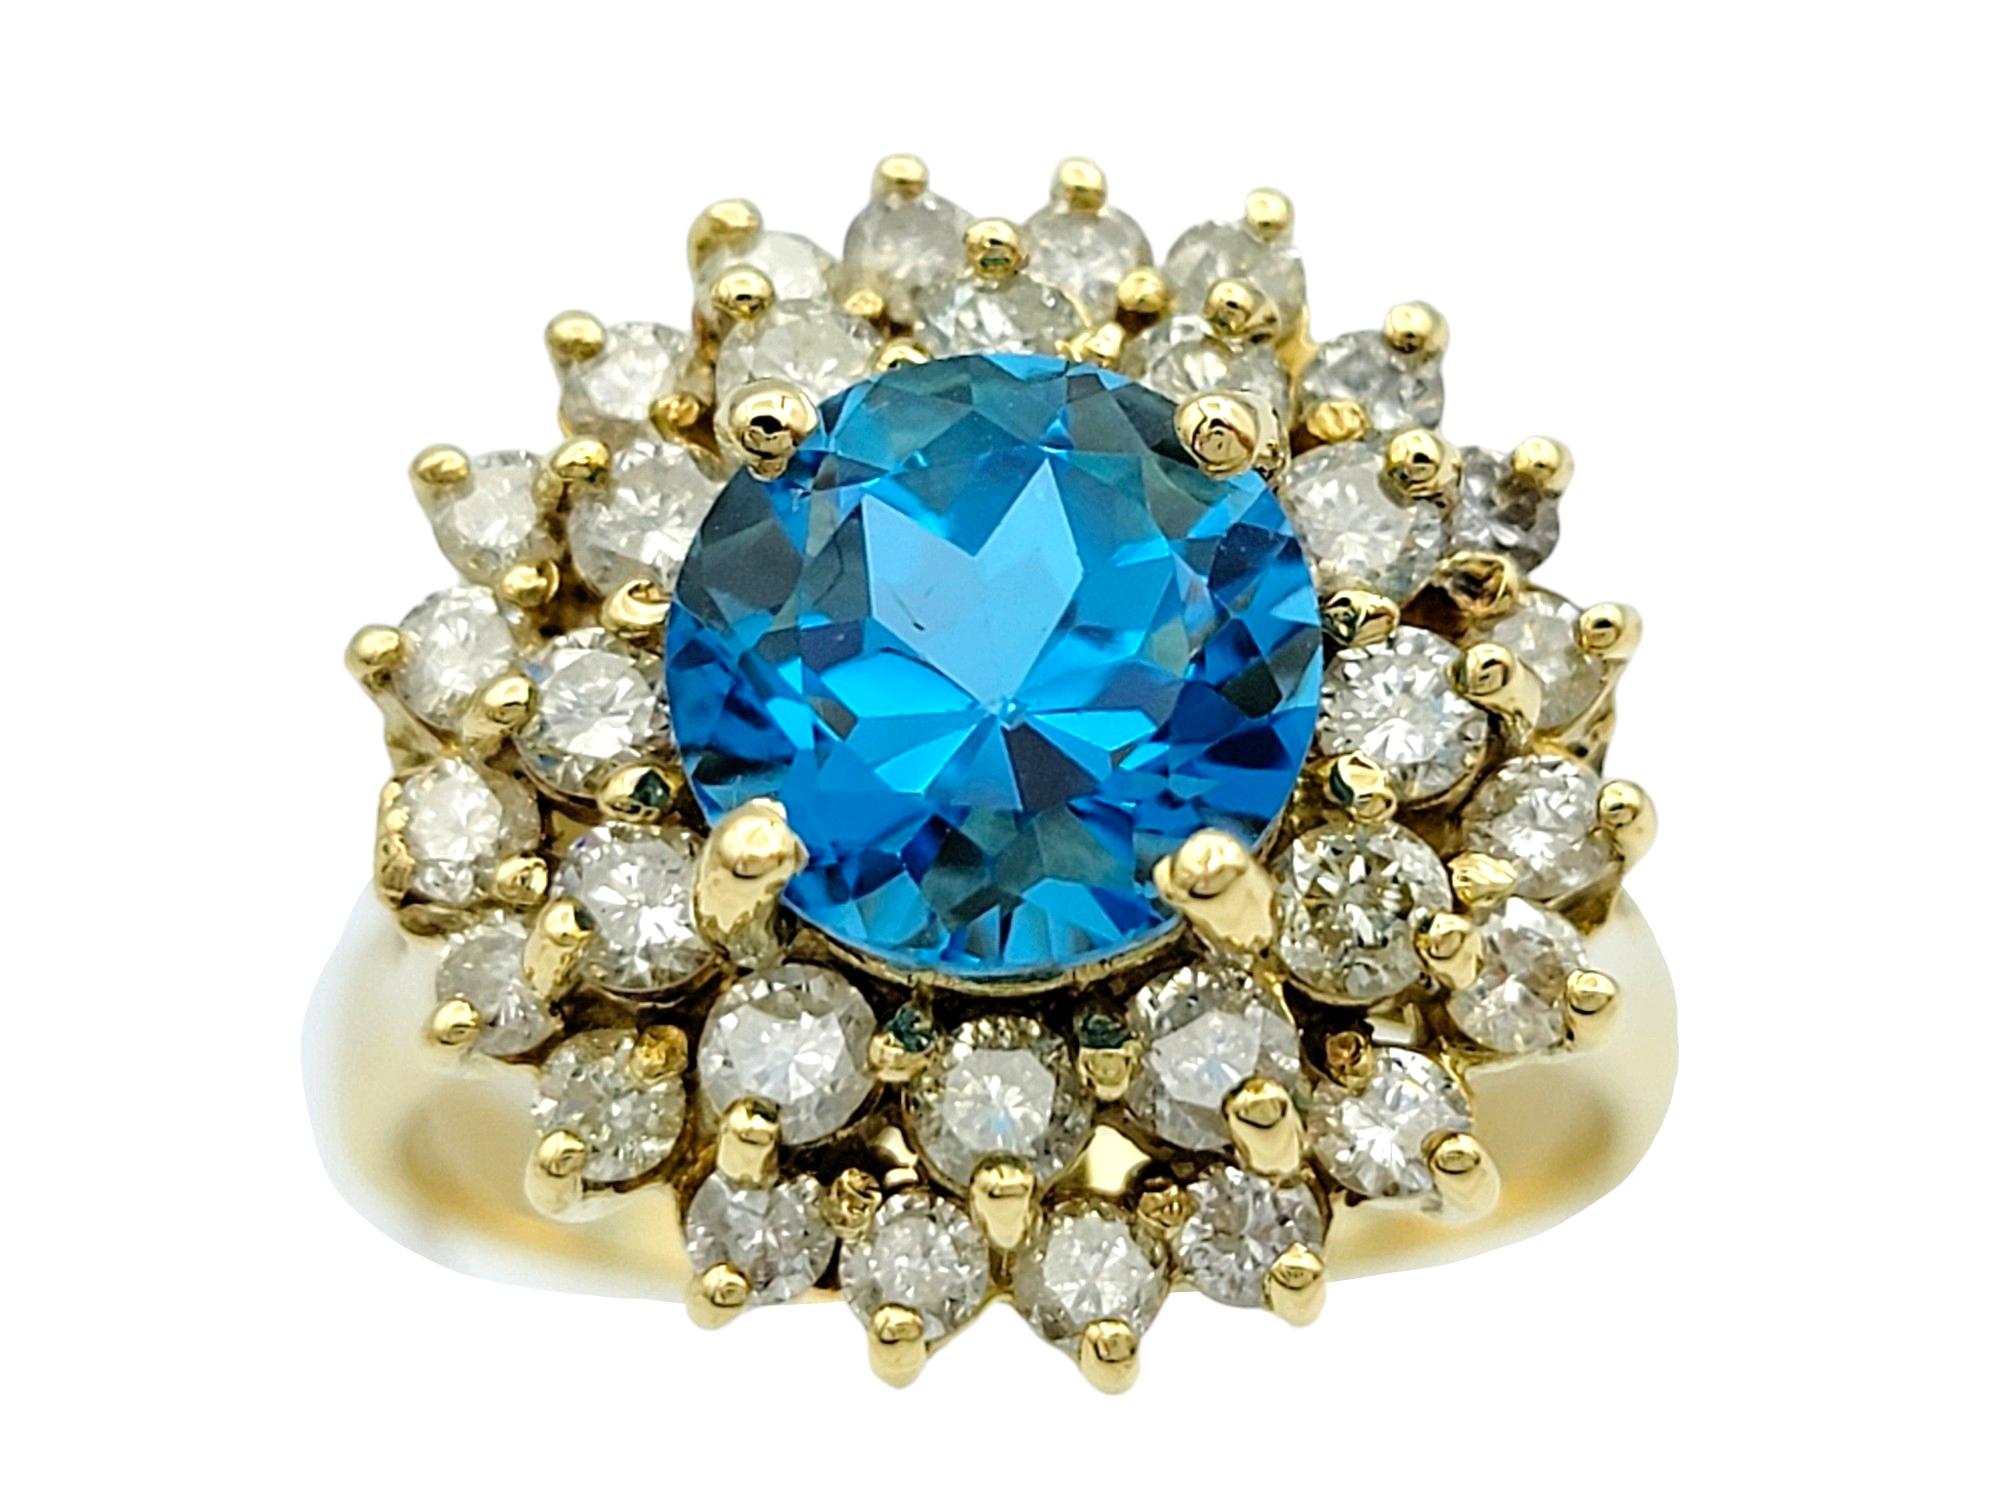 Ring Size: 11.5

This gorgeous blue topaz and double halo diamond ring set in 18 karat yellow gold is a captivating and elegant piece of jewelry. At the center of the ring sits a mesmerizing blue topaz gemstone, radiating a serene and calming hue.